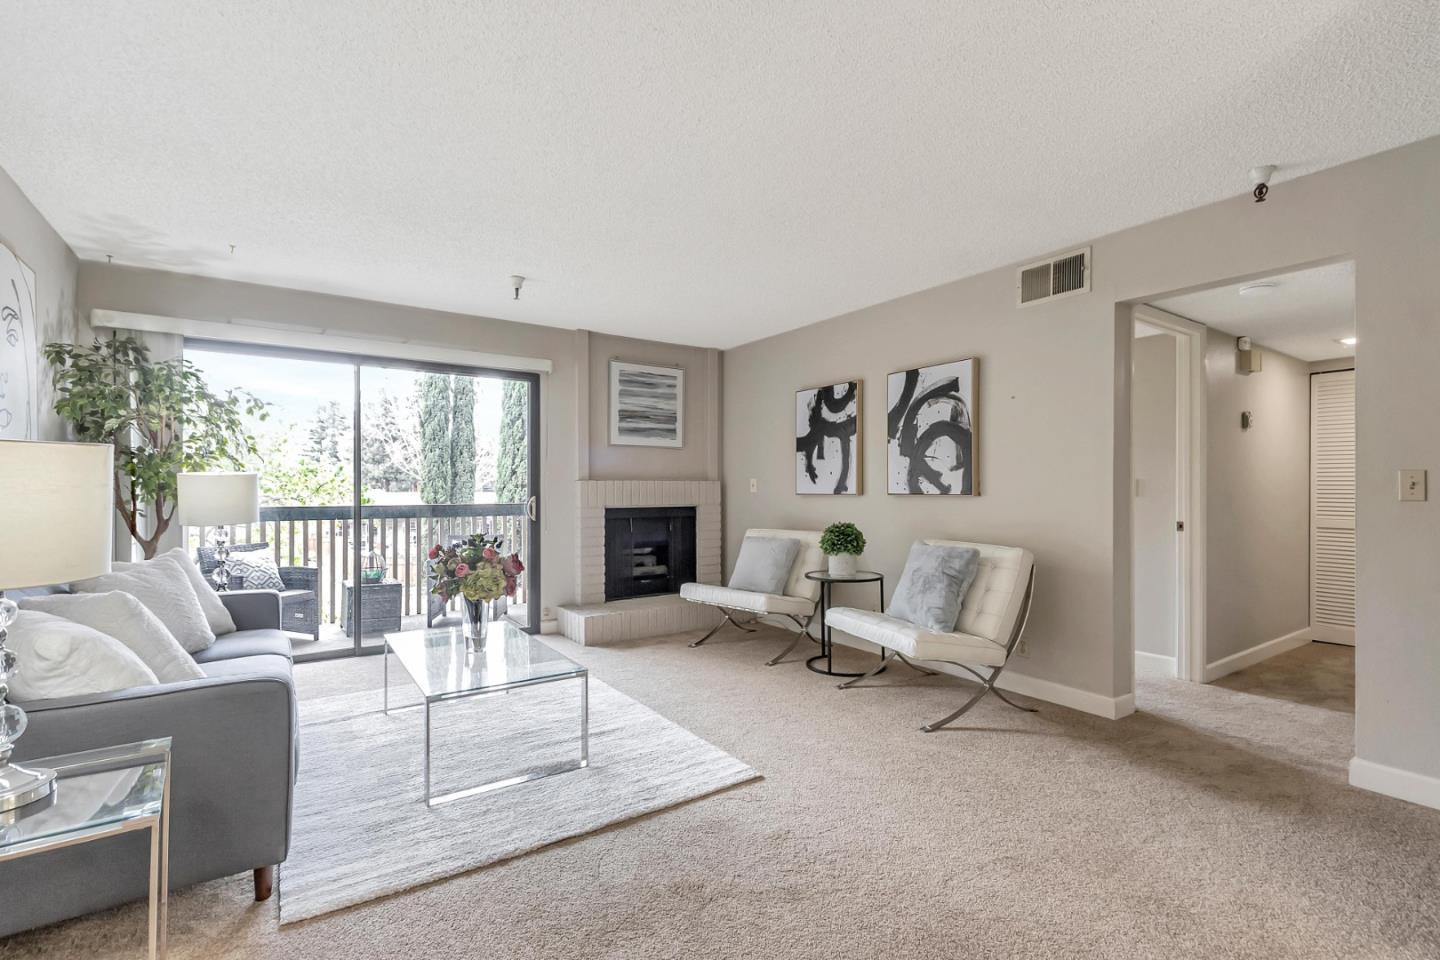 Photo of 2211 Latham St #222 in Mountain View, CA